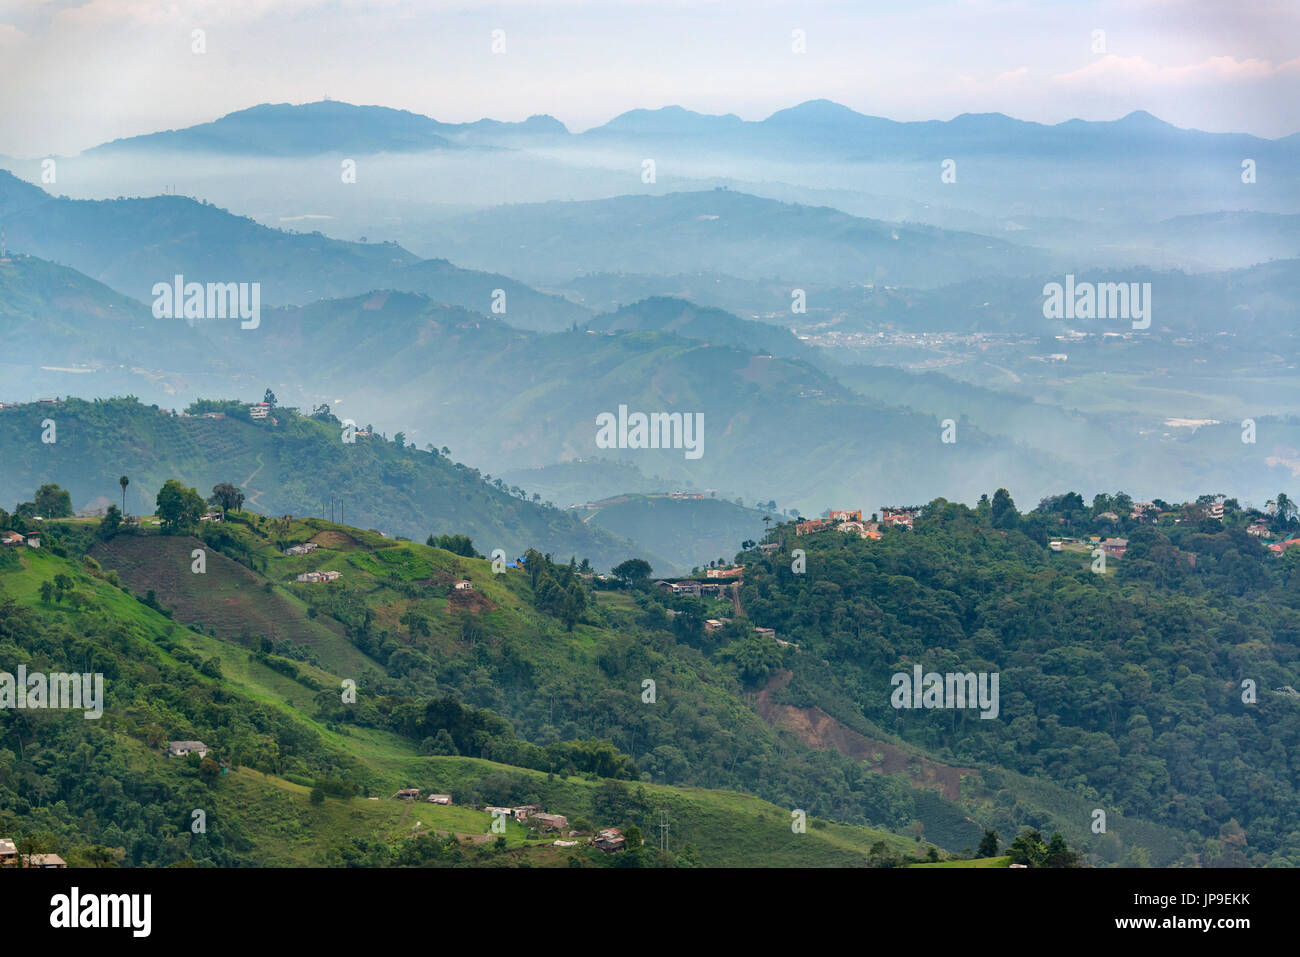 Lush green rolling hills landscape on the outskirts of Manizales, Colombia Stock Photo